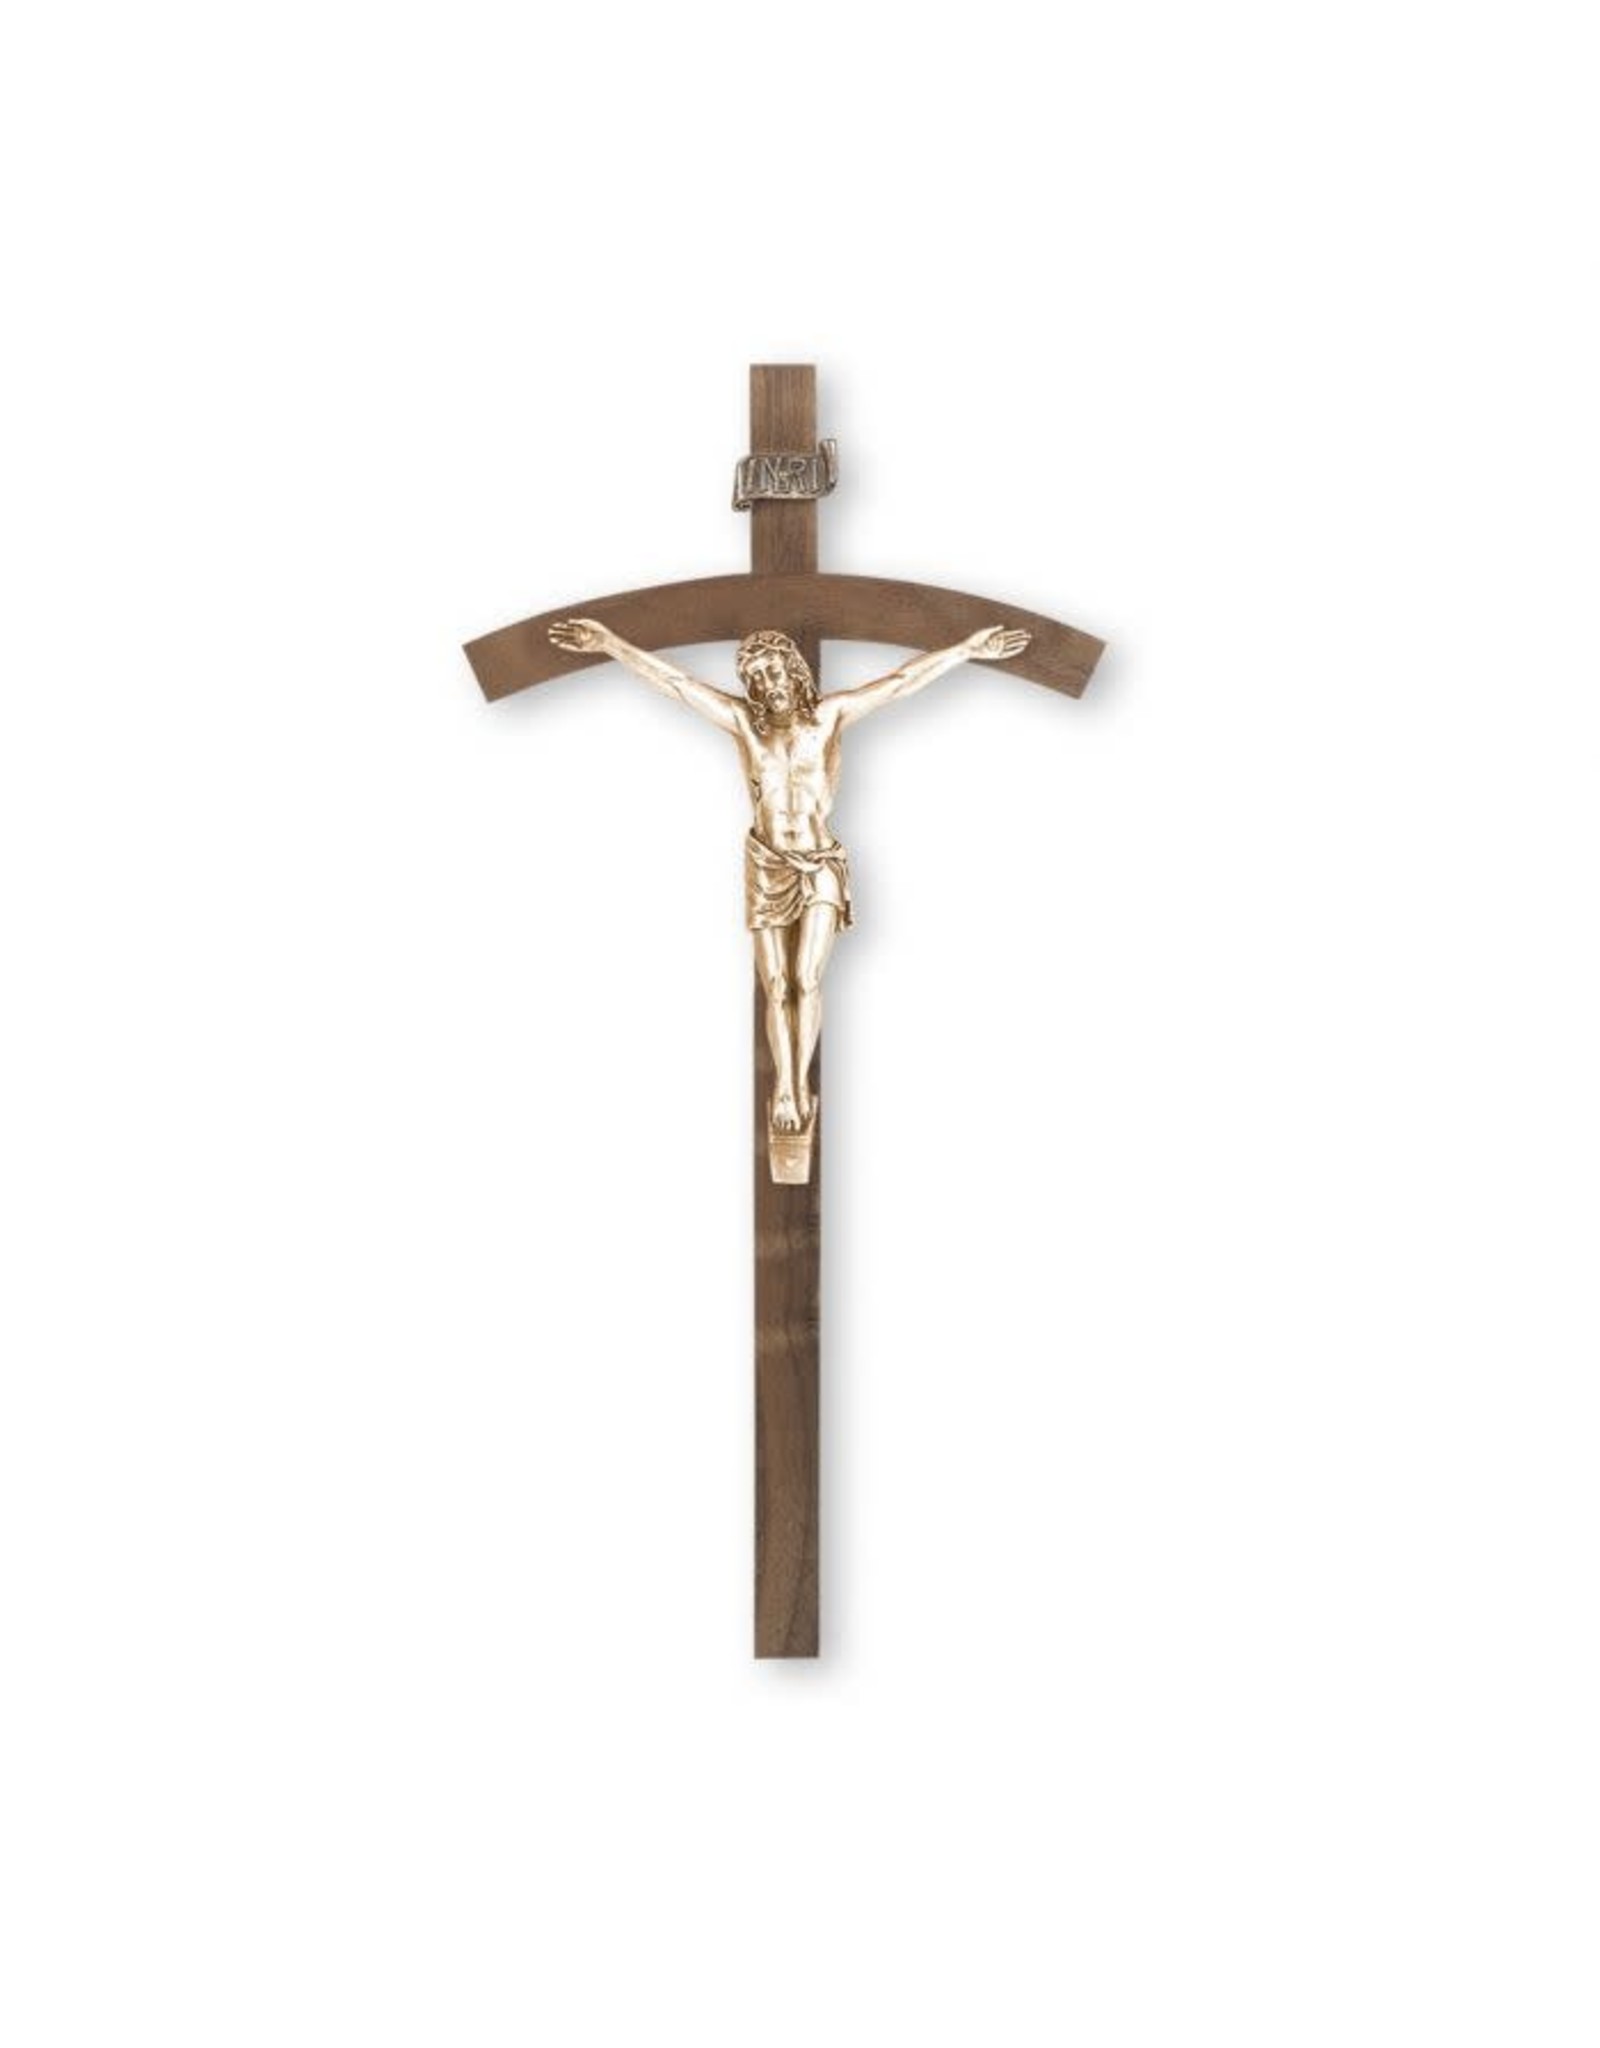 10" Walnut Wood Cross with Museum Gold Plated Antiqued Corpus